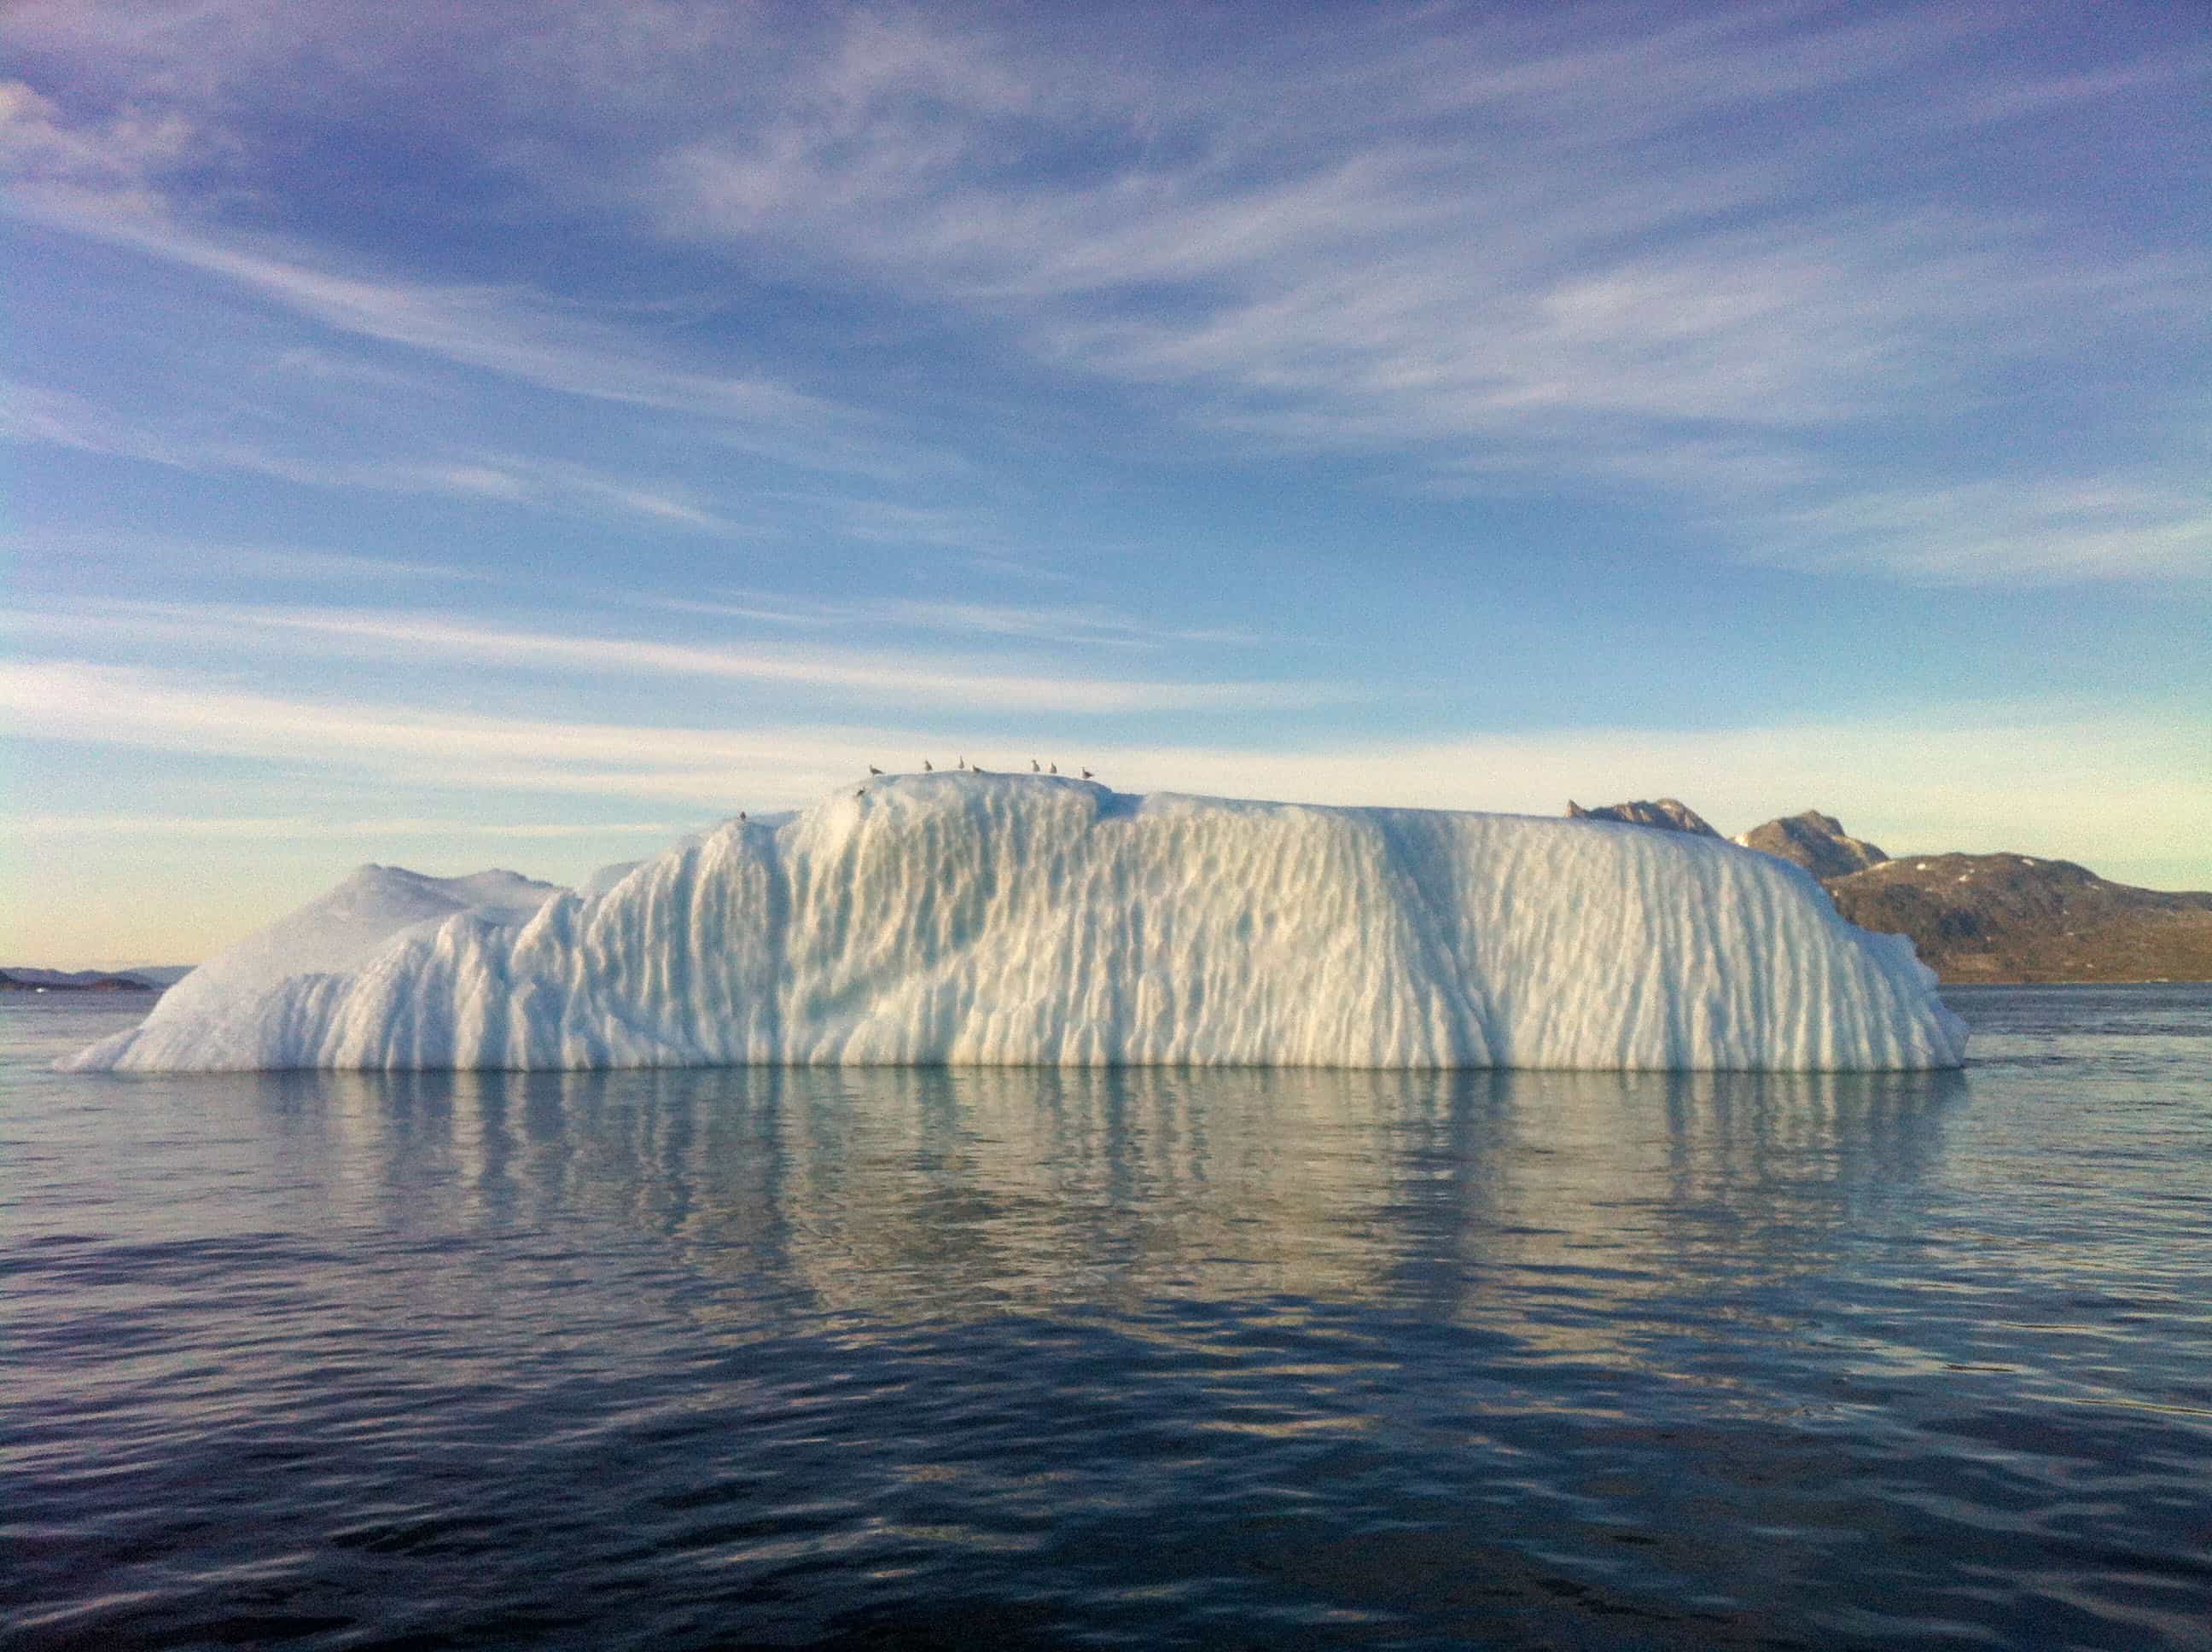 In addition to their important role as carbon sinks, scientists showed that icebergs can be crucial players in the preservation of marine productivity.